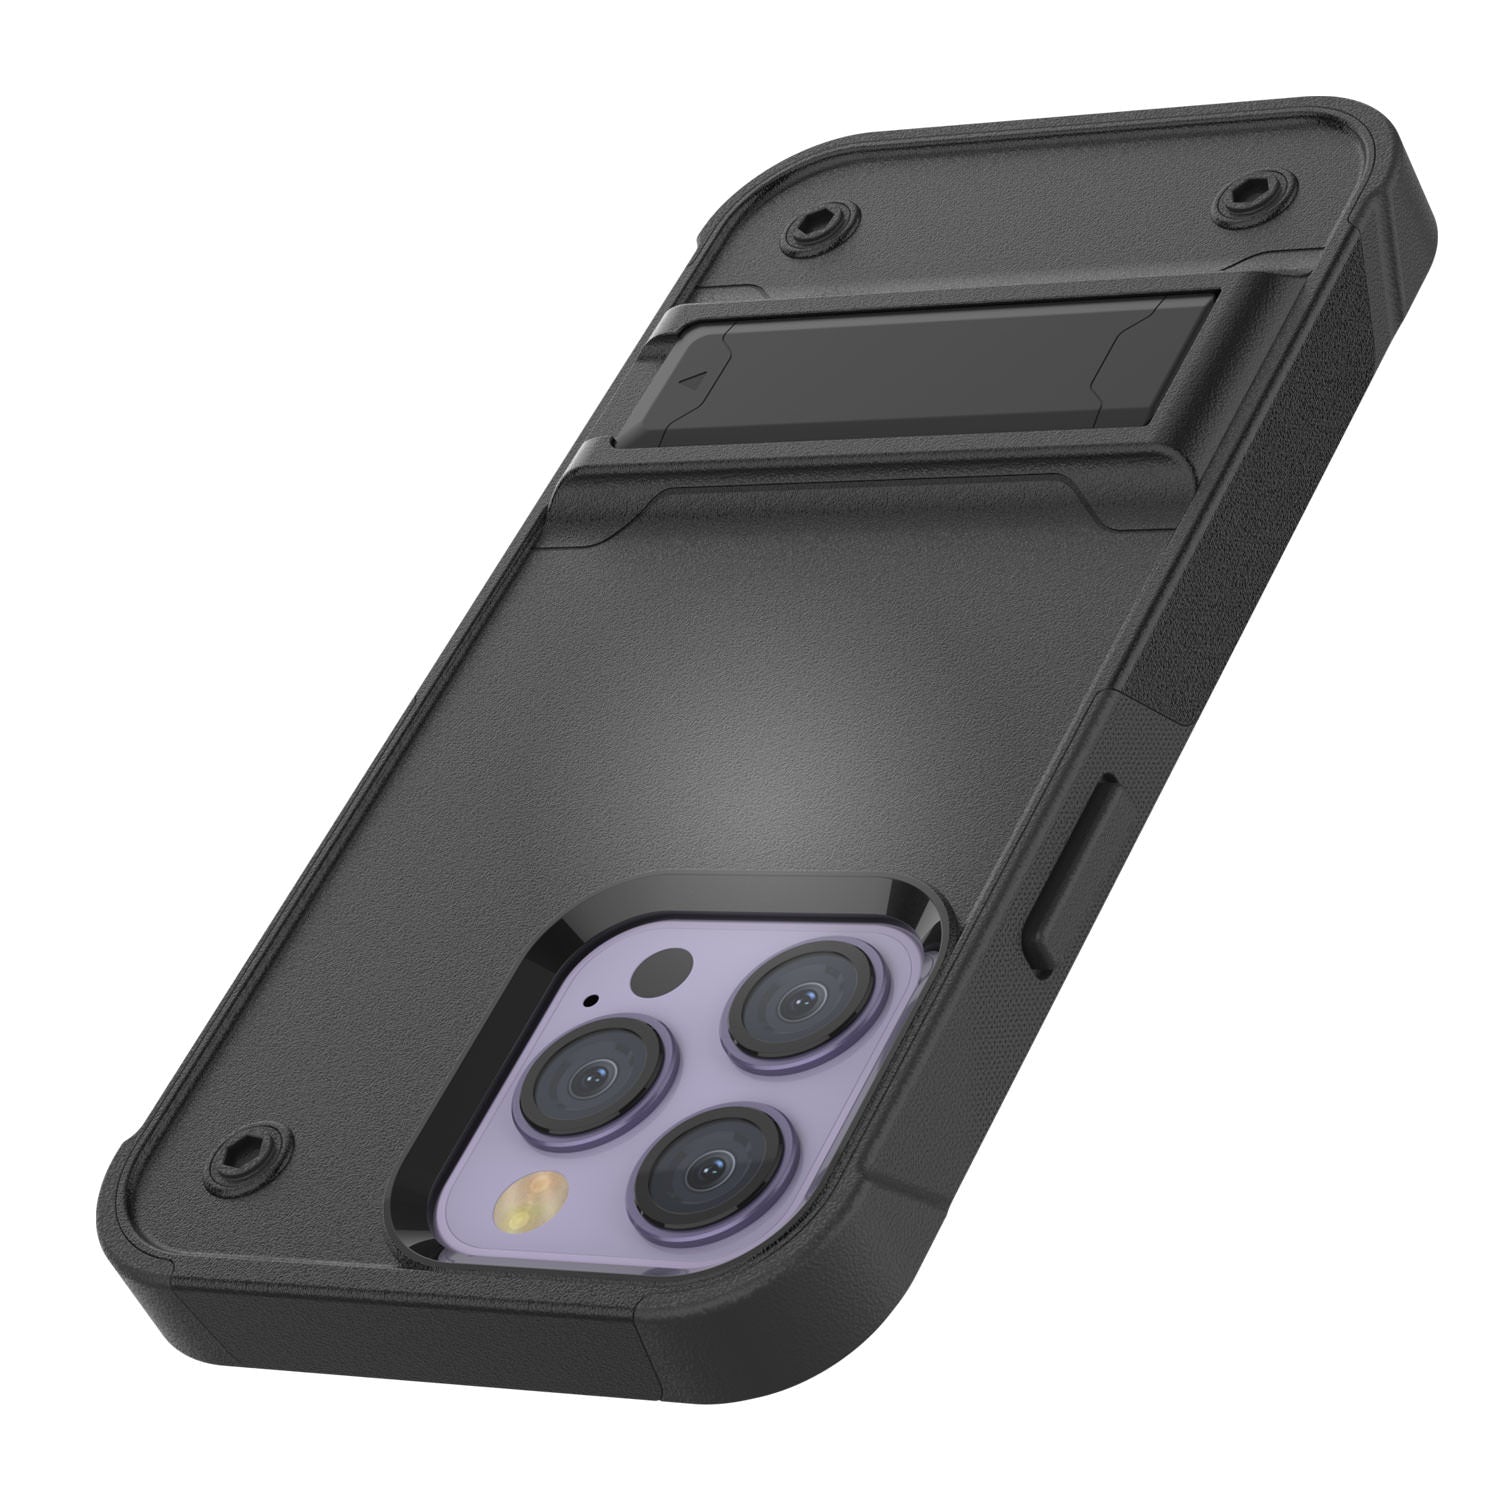 Punkcase iPhone 14 Pro Max Case [Reliance Series] Protective Hybrid Military Grade Cover W/Built-in Kickstand [Black]